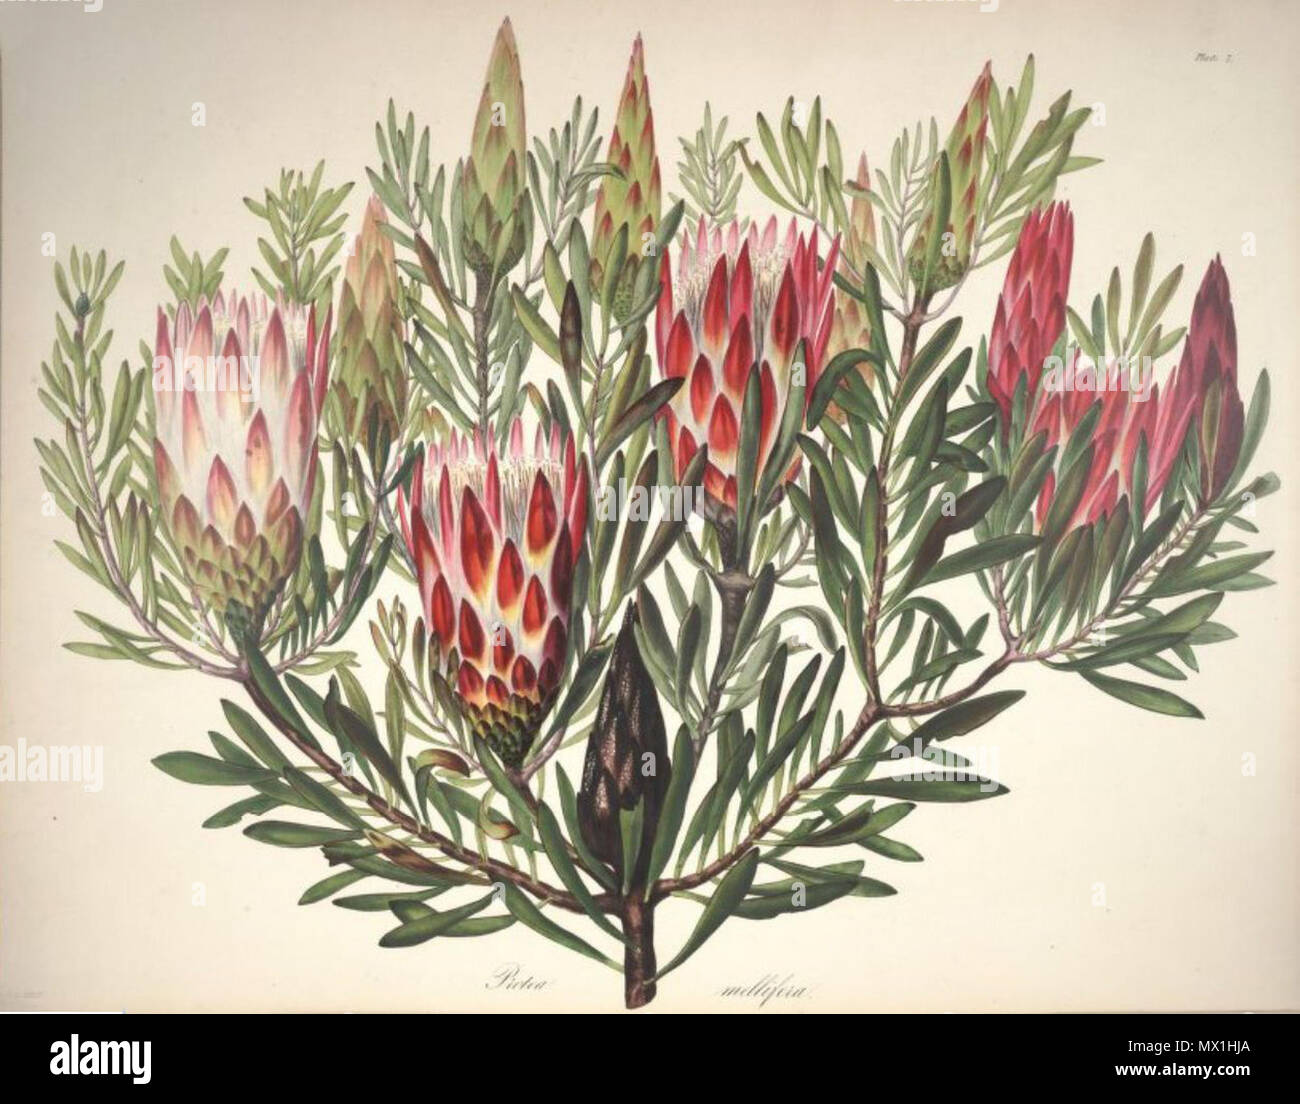 . English: Protea mellifera Thunb. is a synonym of Protea repens L. between 1843 and 1844.   Arabella Elizabeth Roupell  (1817–1914)     Alternative names Roupell; Arabella Roupell; Arabella Elizabeth Pigott  Description British-South African botanical illustrator, painter and botanist  Date of birth/death 23 March 1817 31 July 1914  Location of birth Newport  Authority control  : Q4783330 VIAF: 15525826 Botanist: Roupell GND: 116664444 54 Arabella Elizabeth Roupell07 Stock Photo